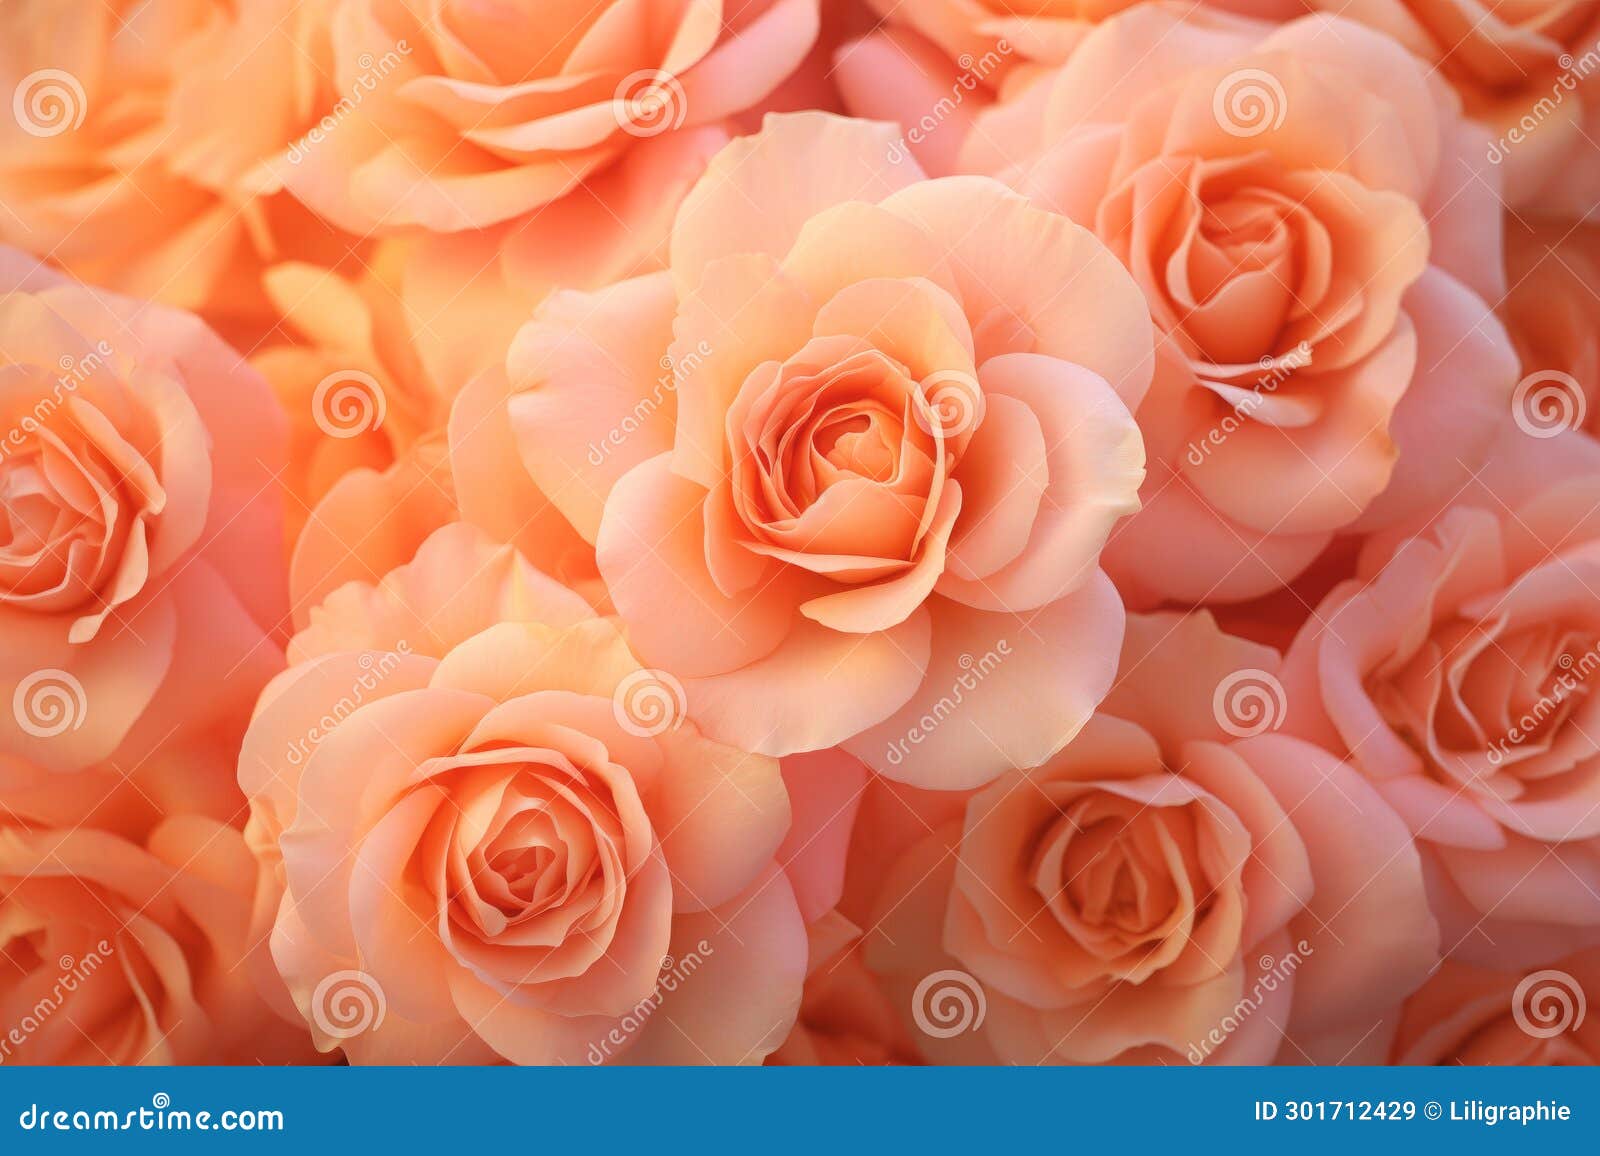 monochrom soft pastel background. peach colored roses flowers